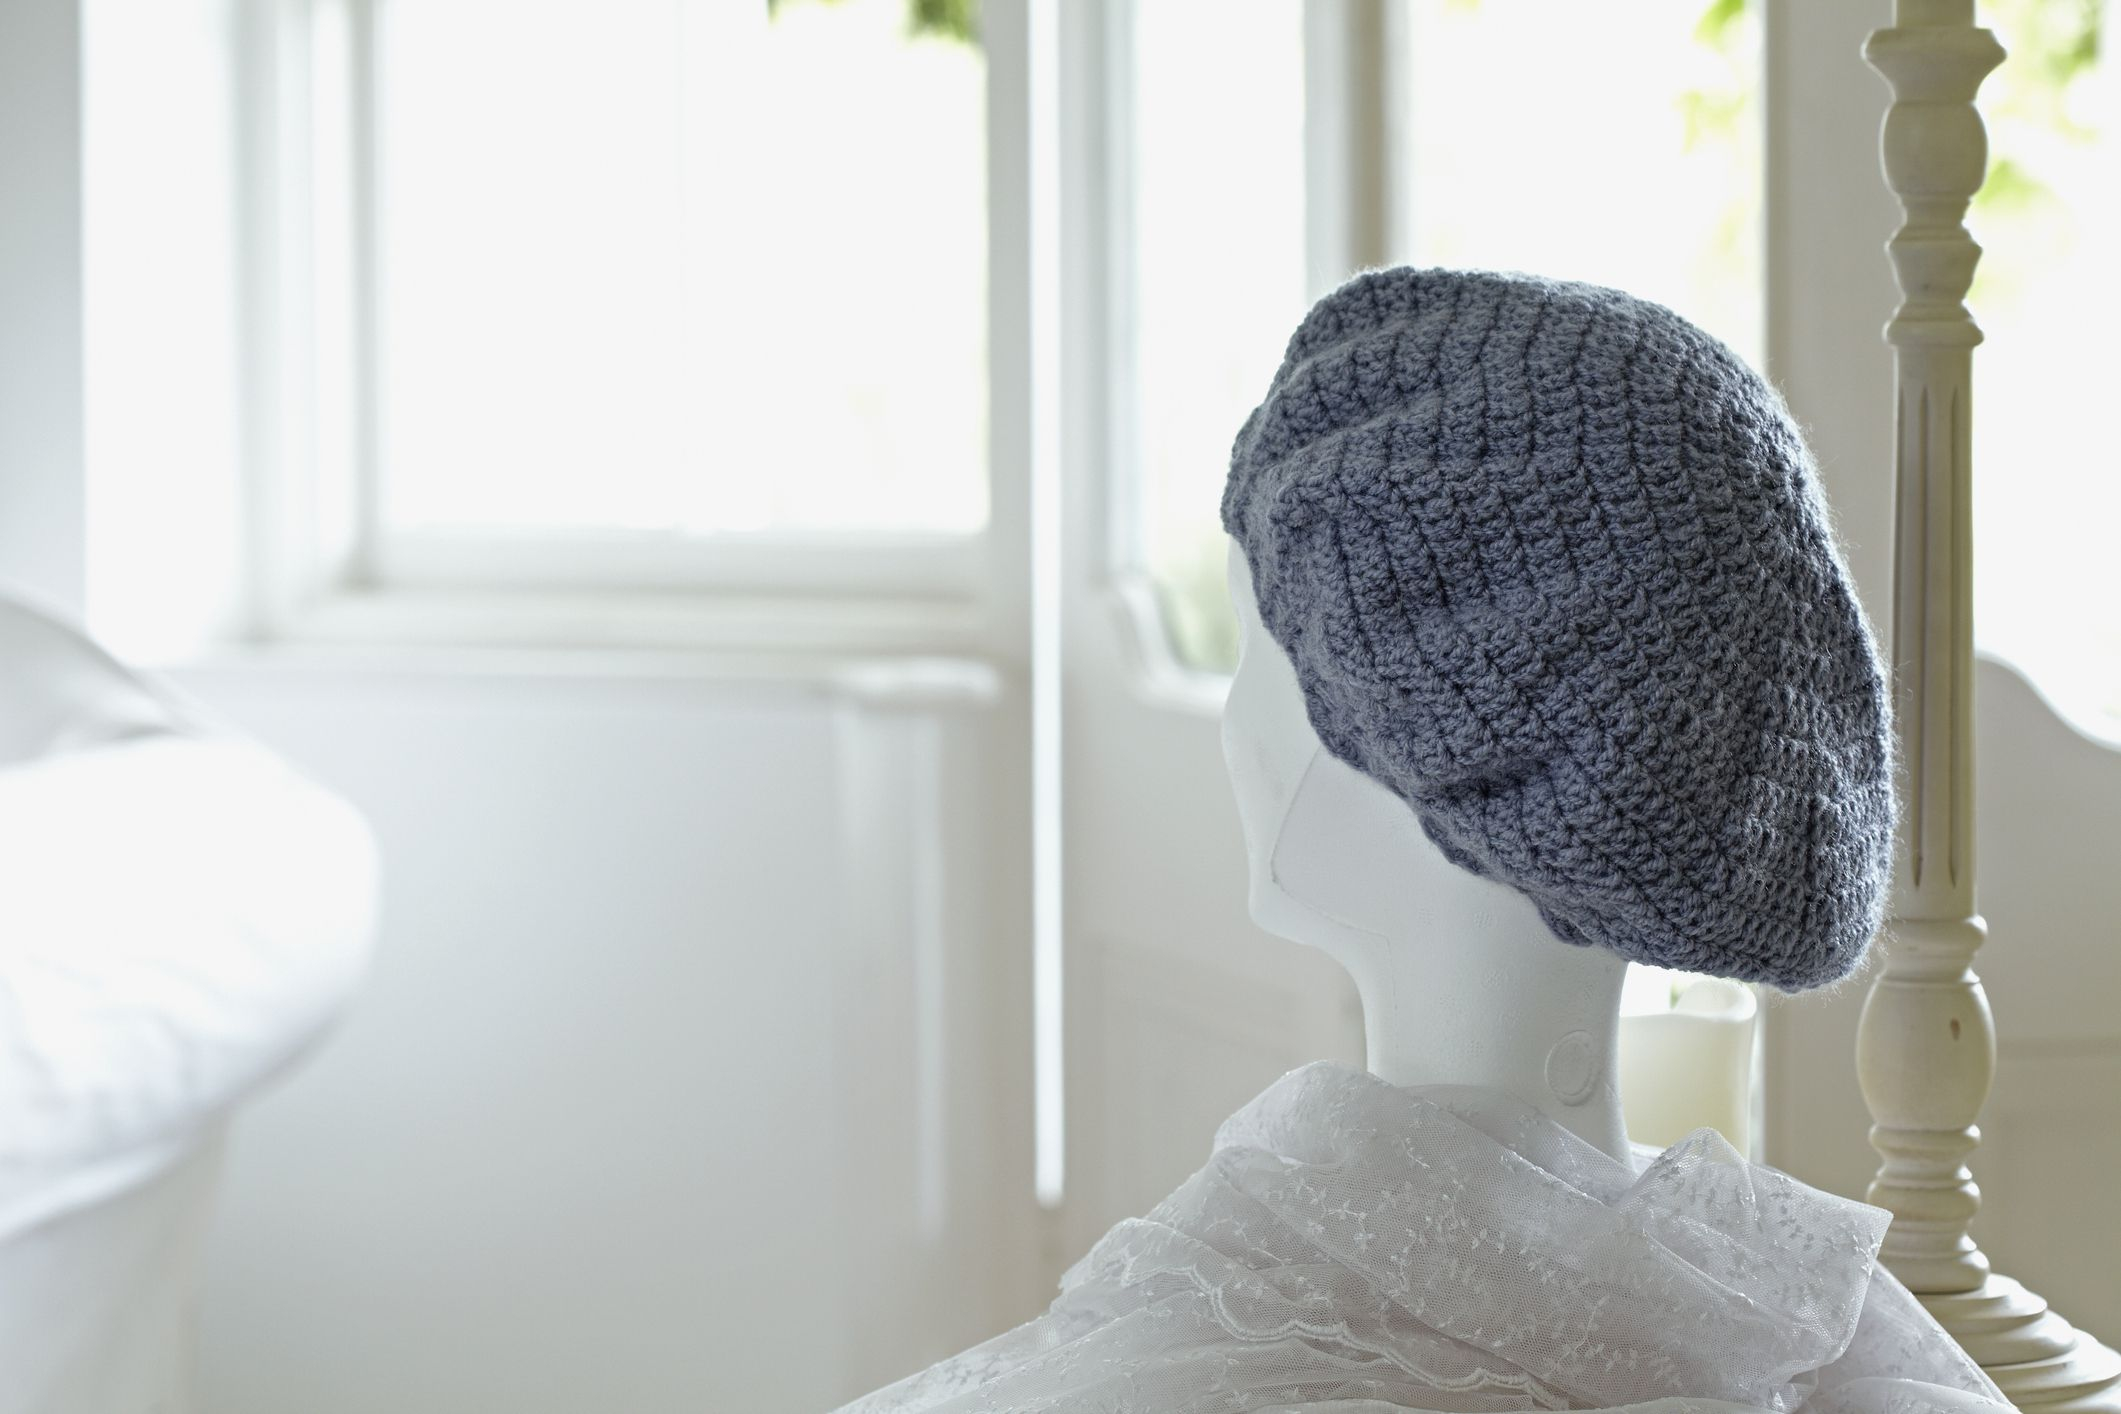 Crochet Chemo Caps Free Patterns What Is A Crochet Chemo Cap For Cancer